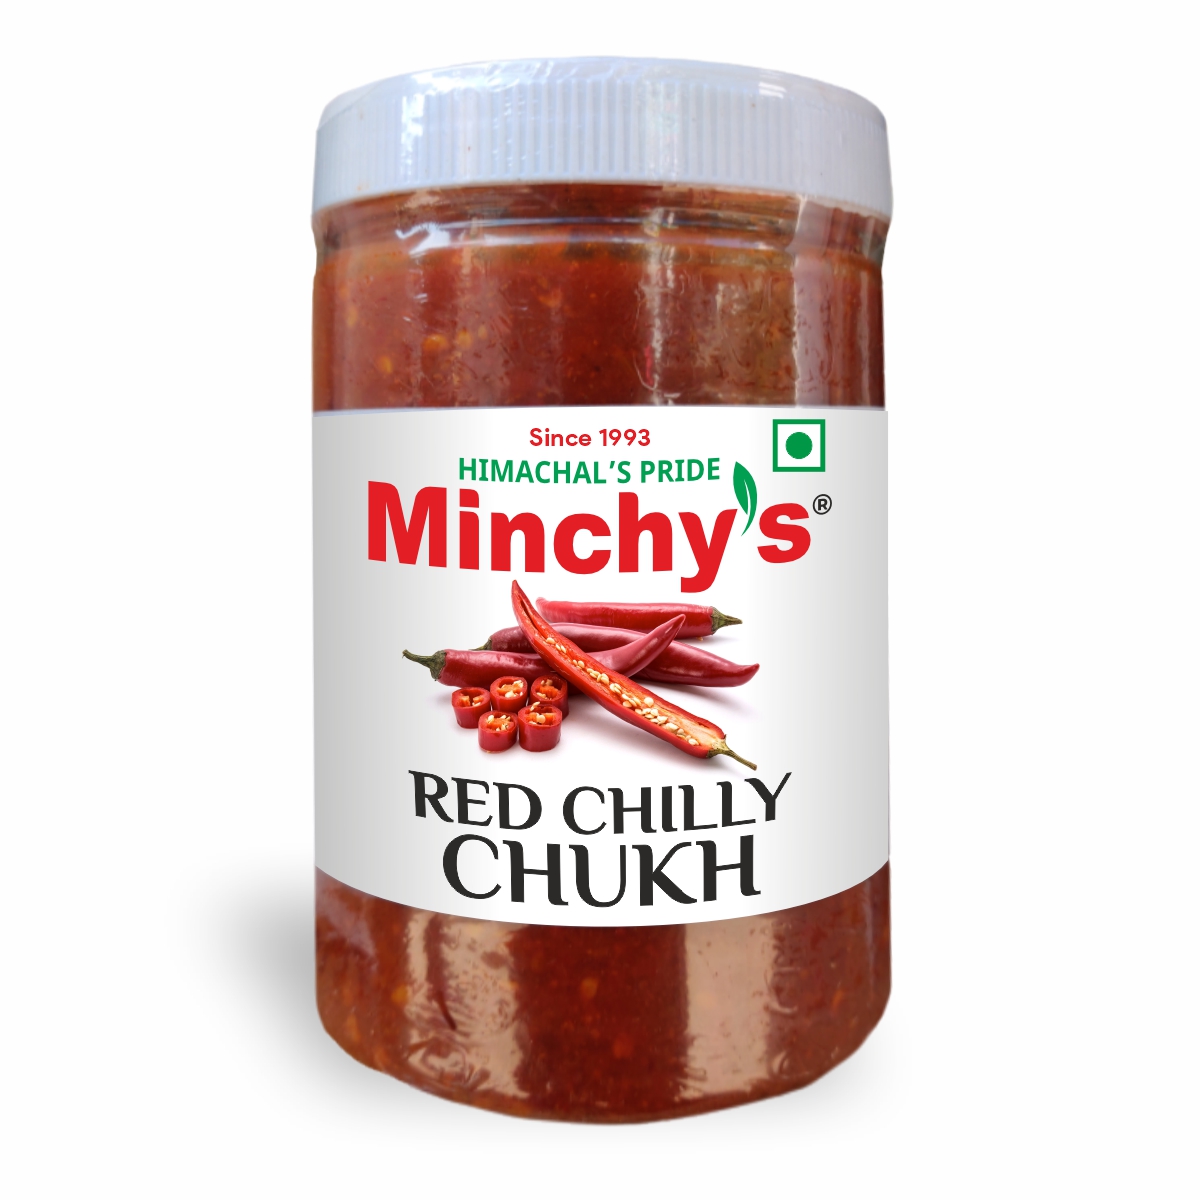 Red Chilly Chukh